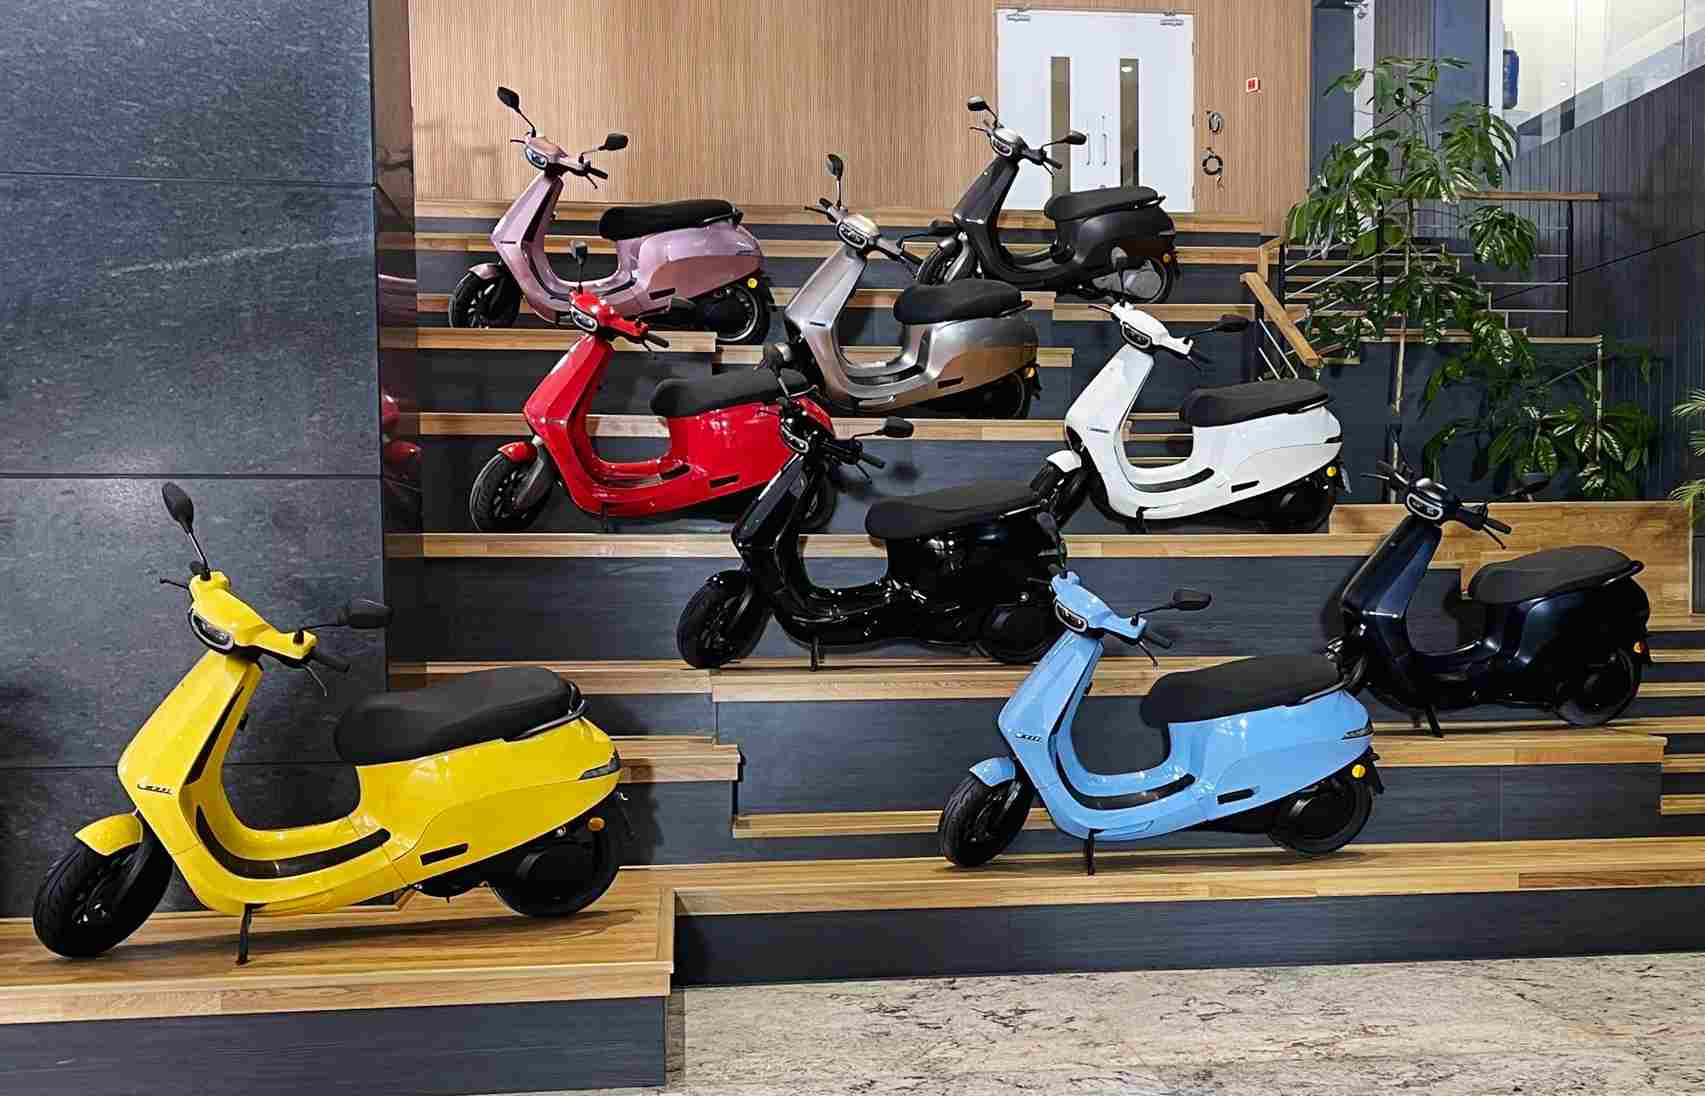 Ola Electric S1 scooter launched in India, prices start at Rs xx lakh